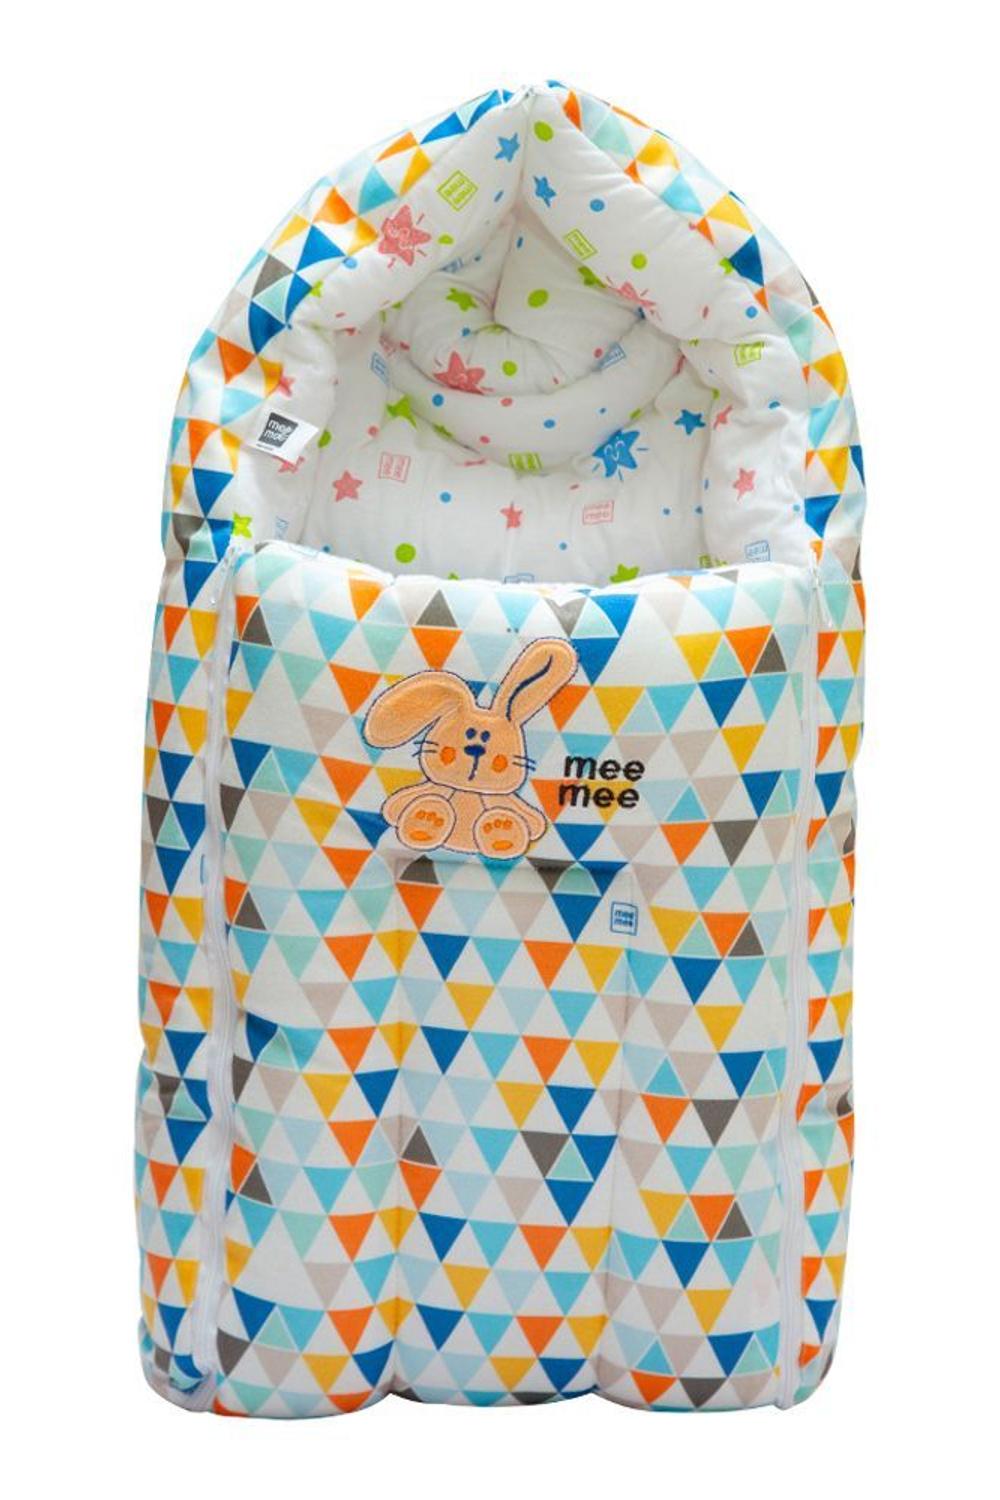 Mee Mee 3 in 1 Baby Carry Nest with Sleeping Bag and Mattress for Babies (Blue Multi Design)